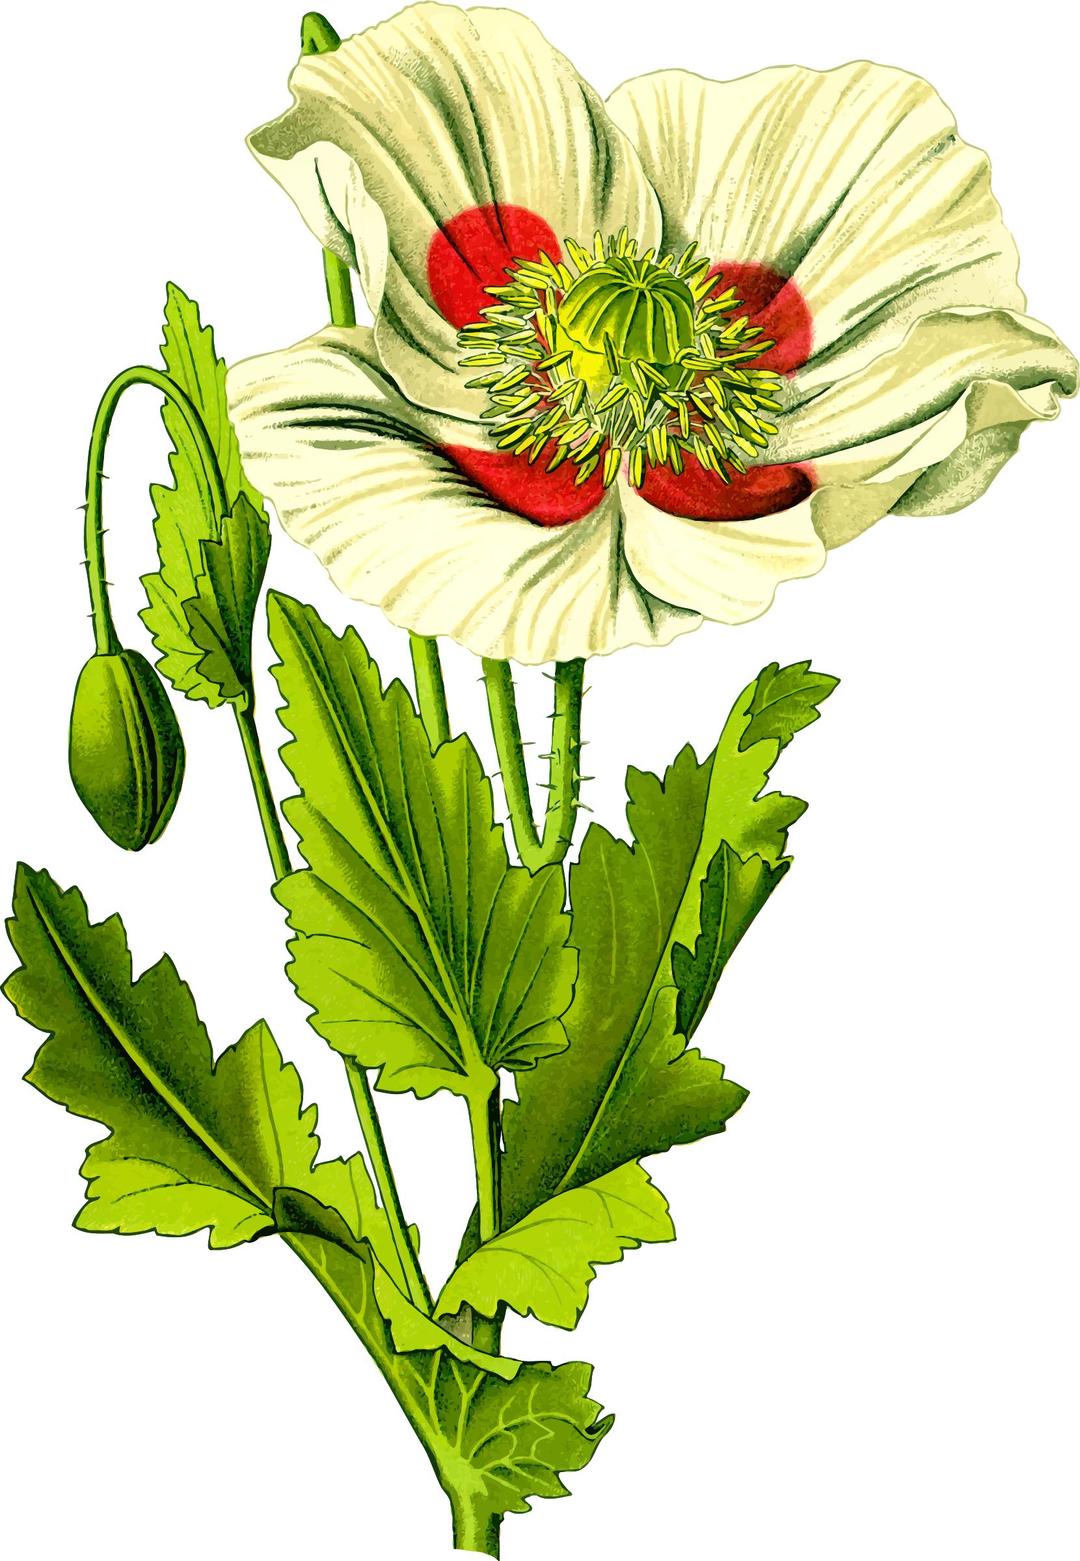 Opium poppy 3 (detailed) png transparent